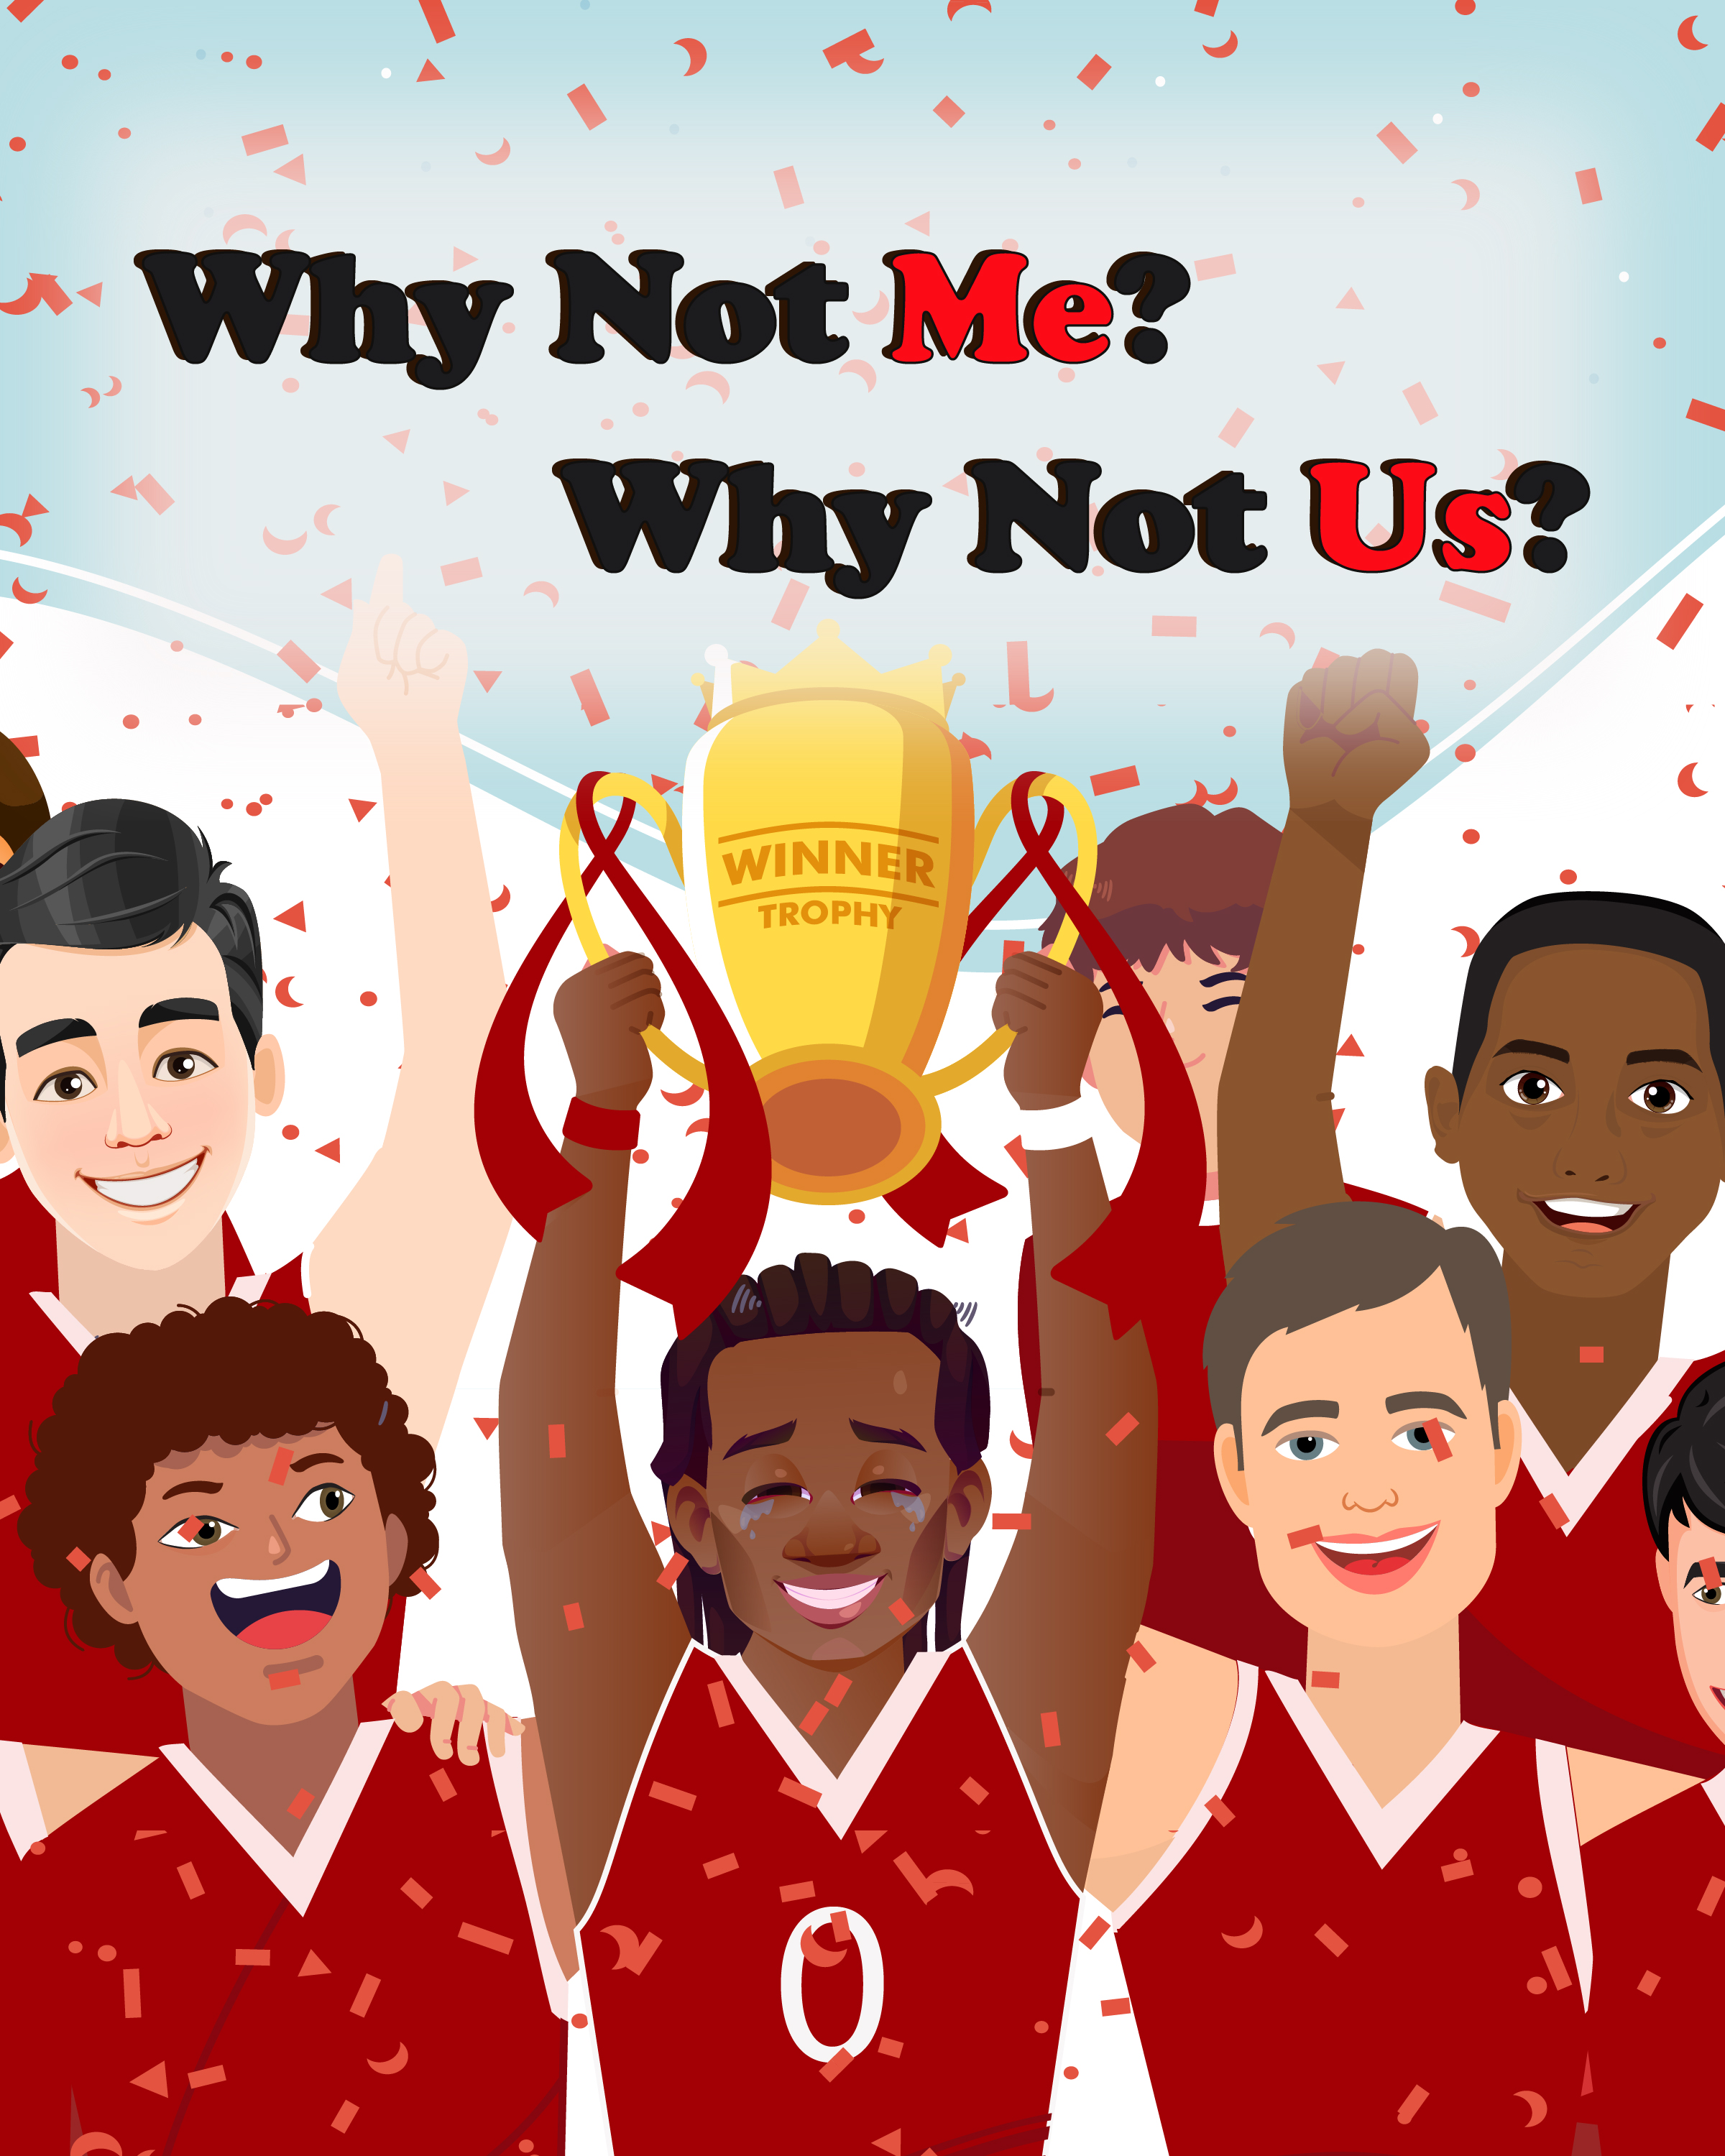 NBA Draft Prospect DJ Horne Launches Inspirational Children's Book "Why Not Me? Why Not Us?"